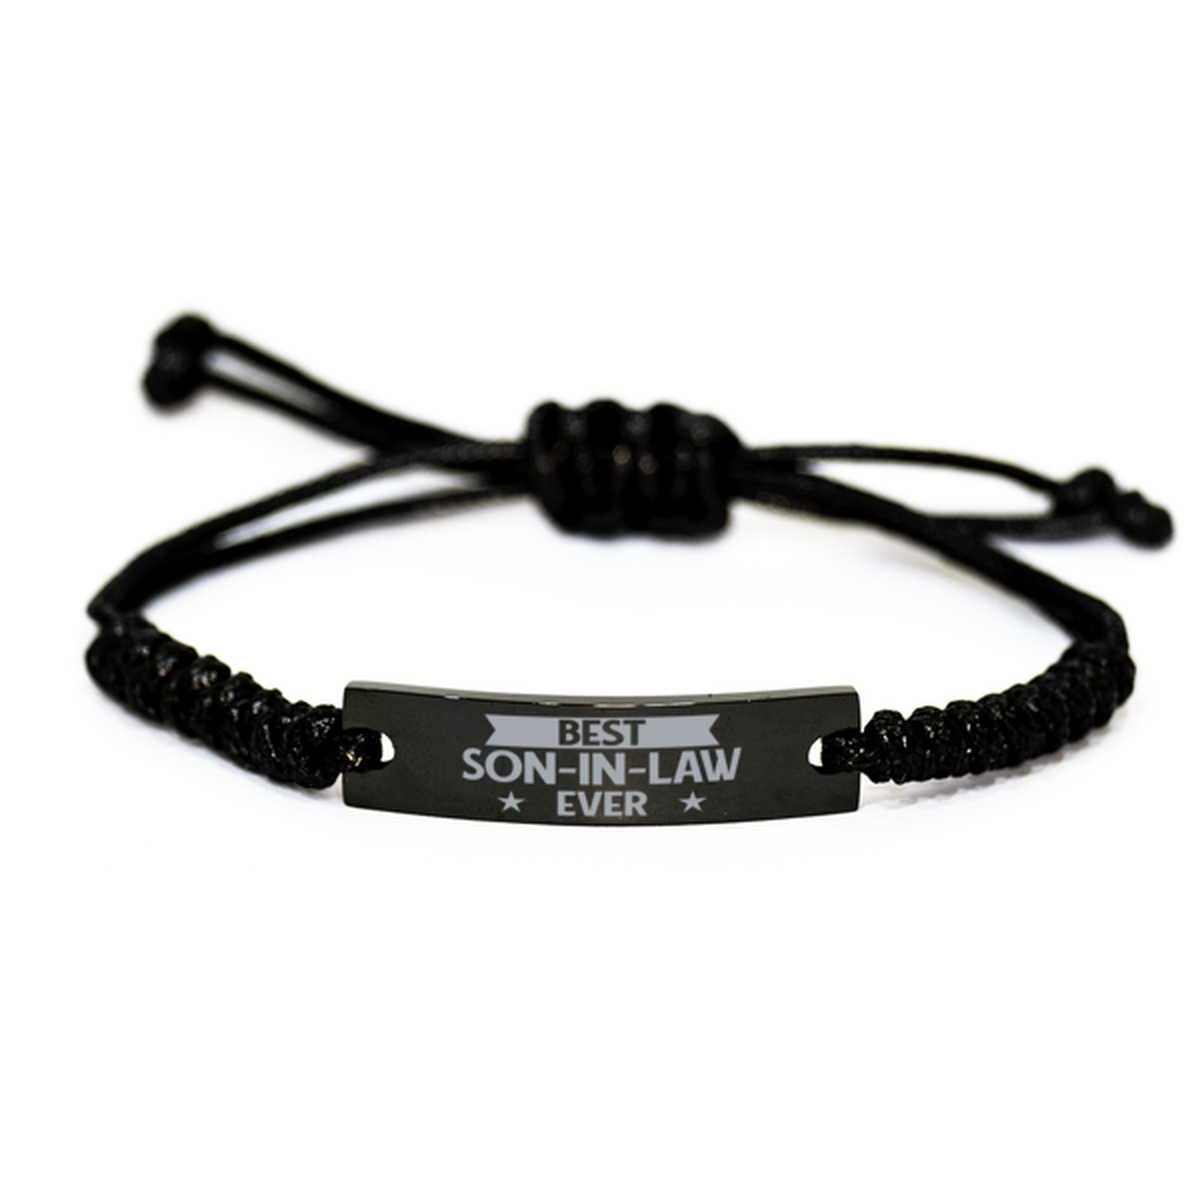 Best Son-in-law Ever Son-in-law Gifts, Funny Engraved Rope Bracelet For Son-in-law, Birthday Family Gifts For Men